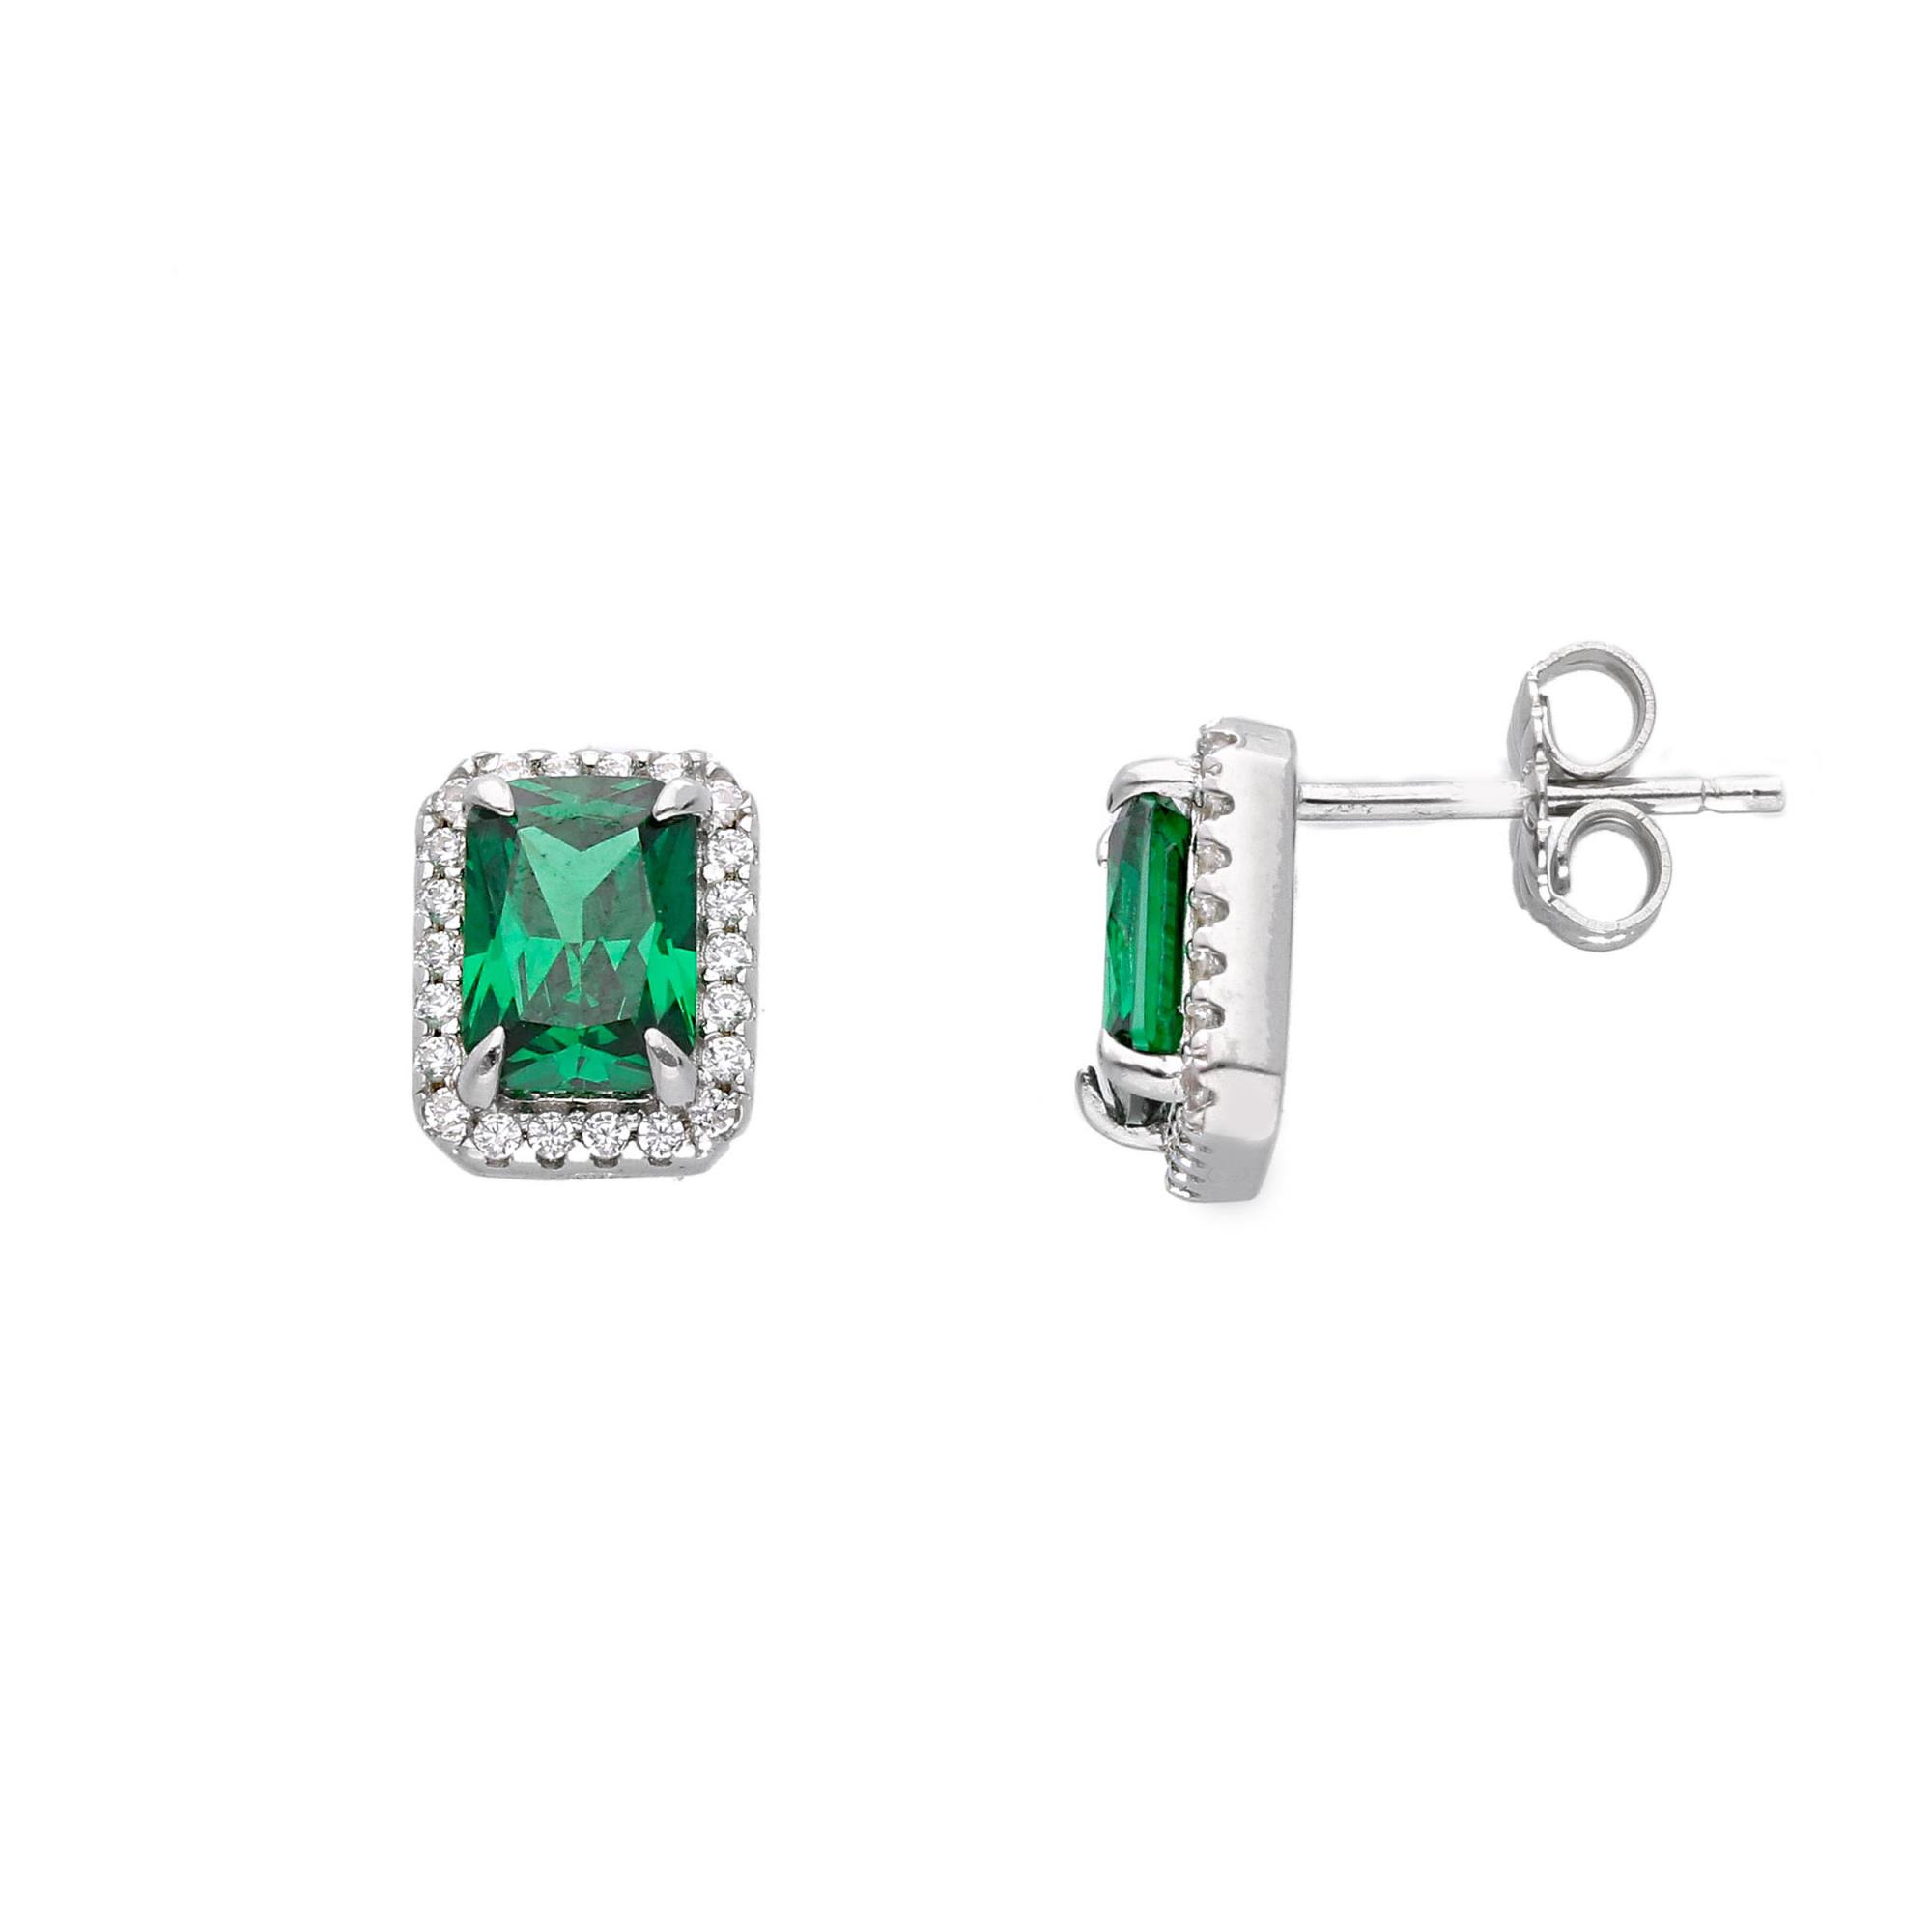 Silver earrings with square green stone and zircons - ORO&CO 925